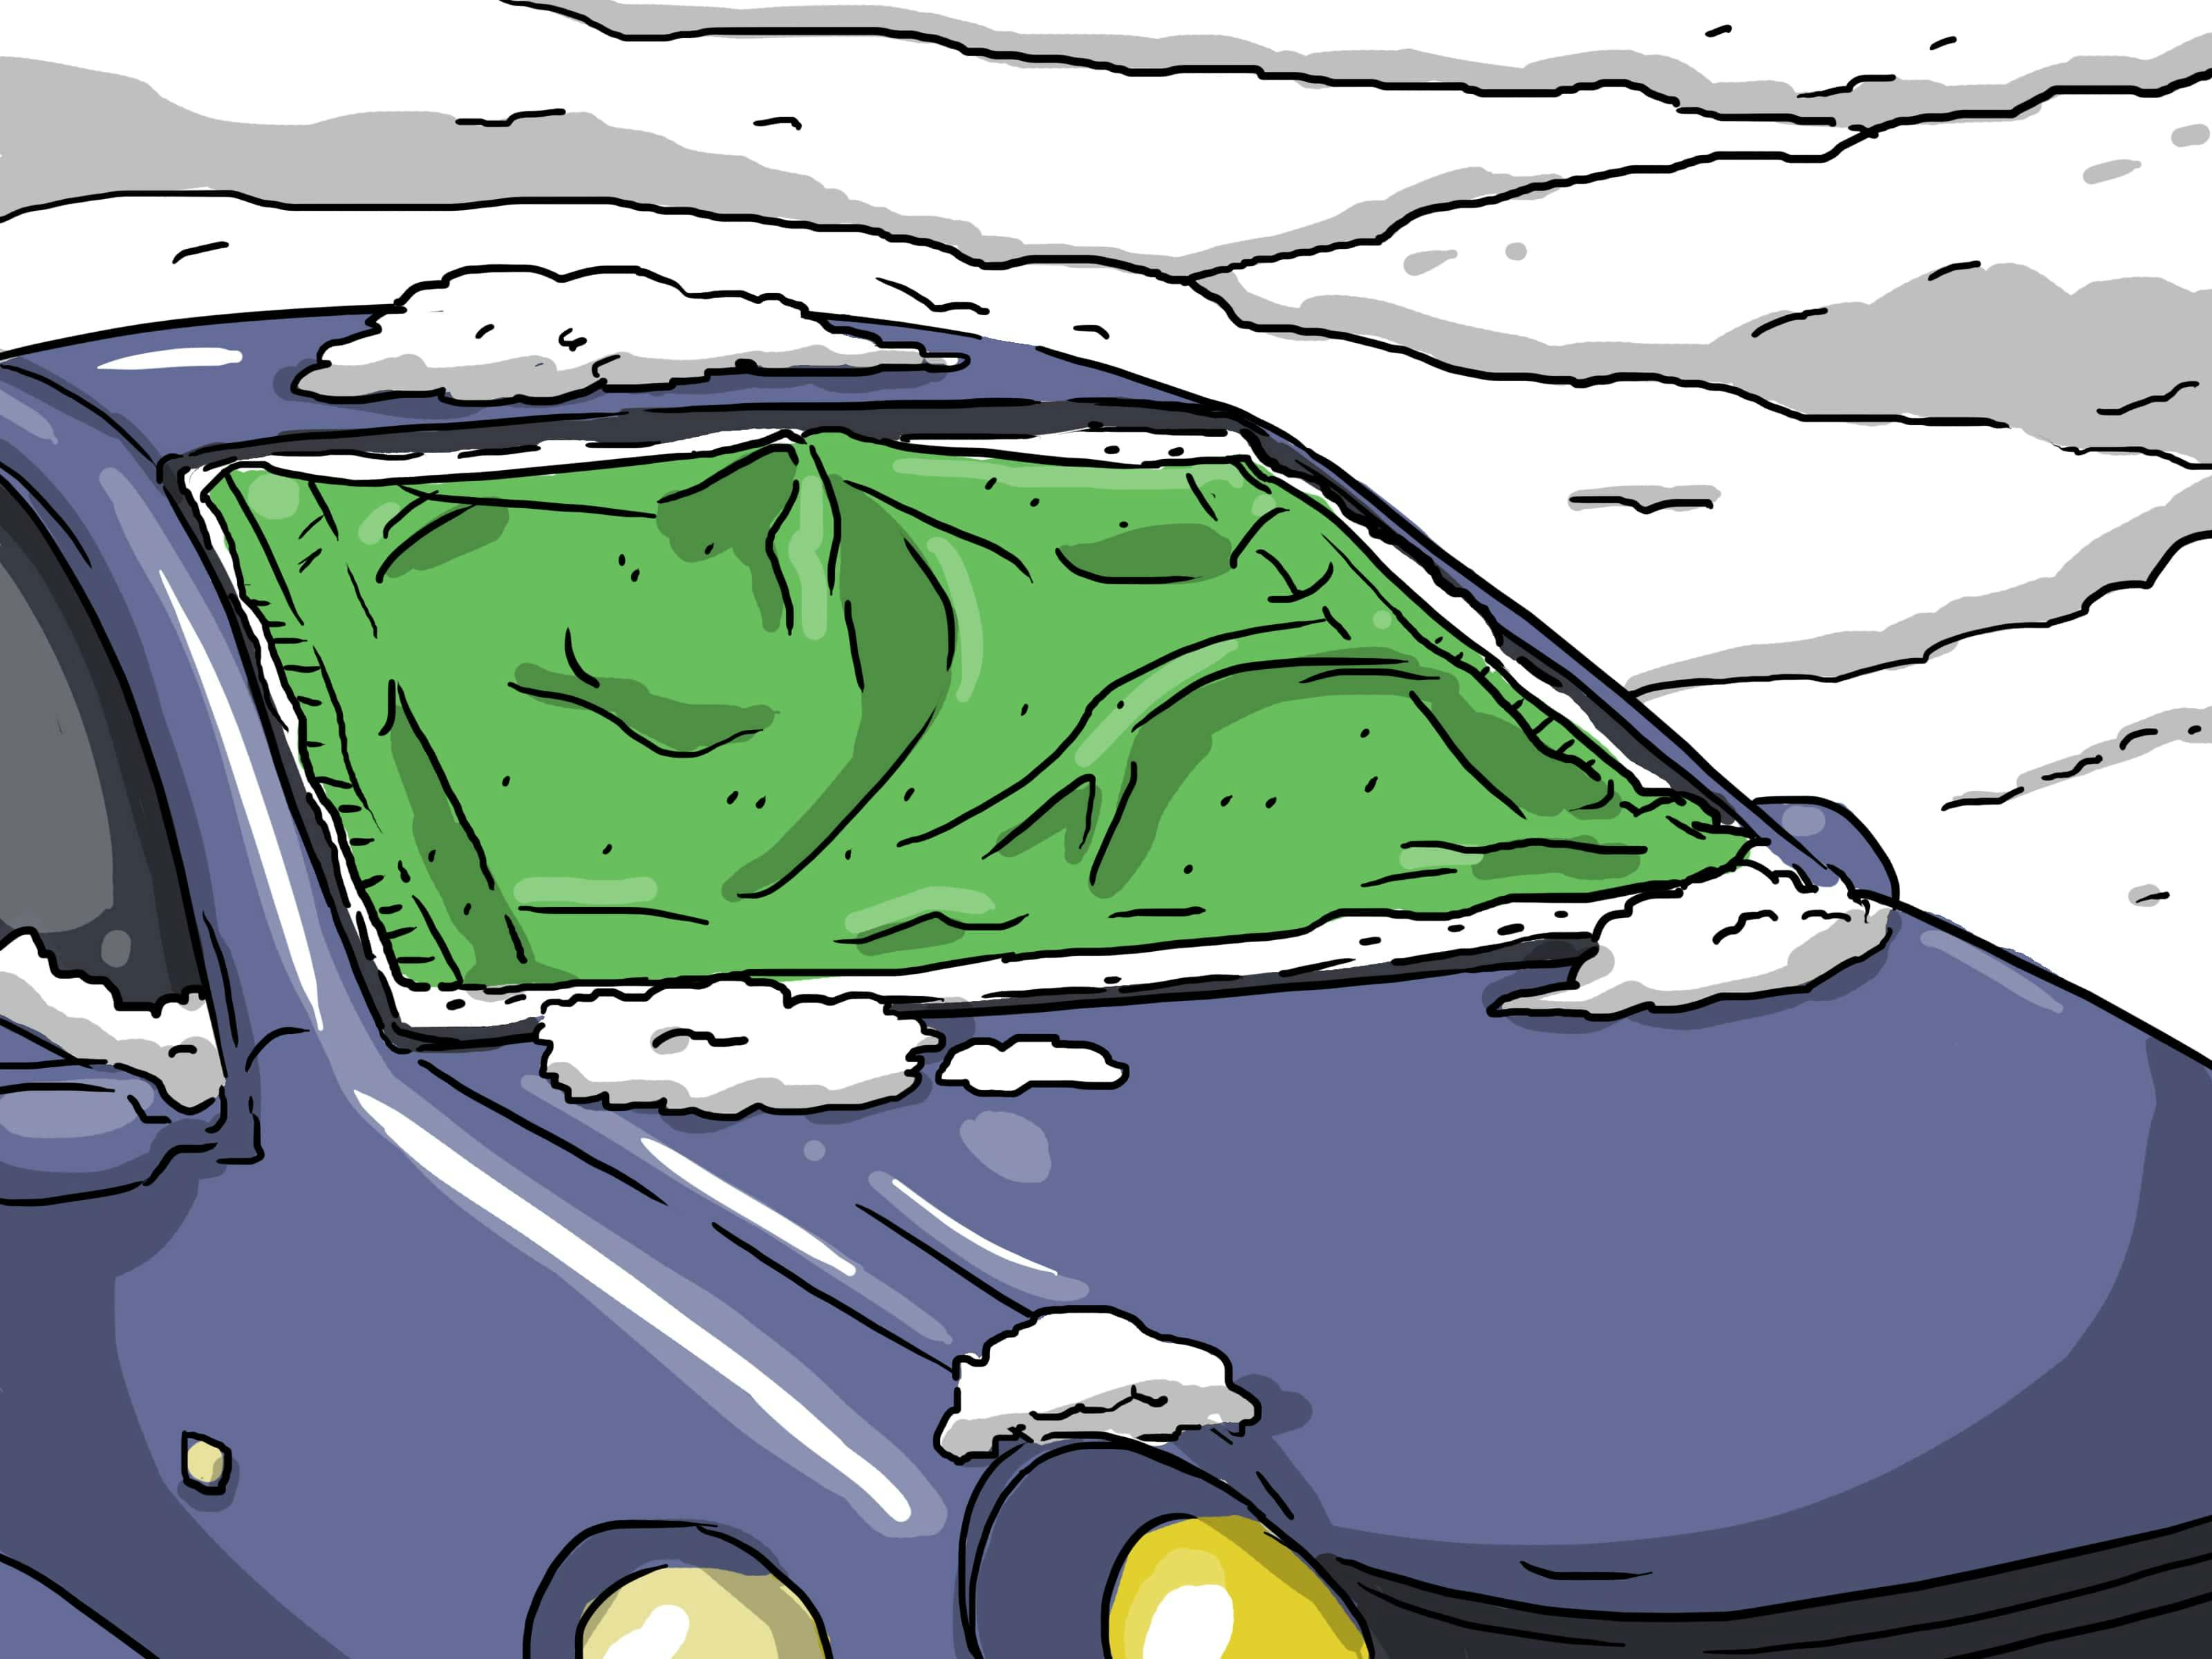 Place a towel on your windshield during snowstorm to prevent ice build-up.